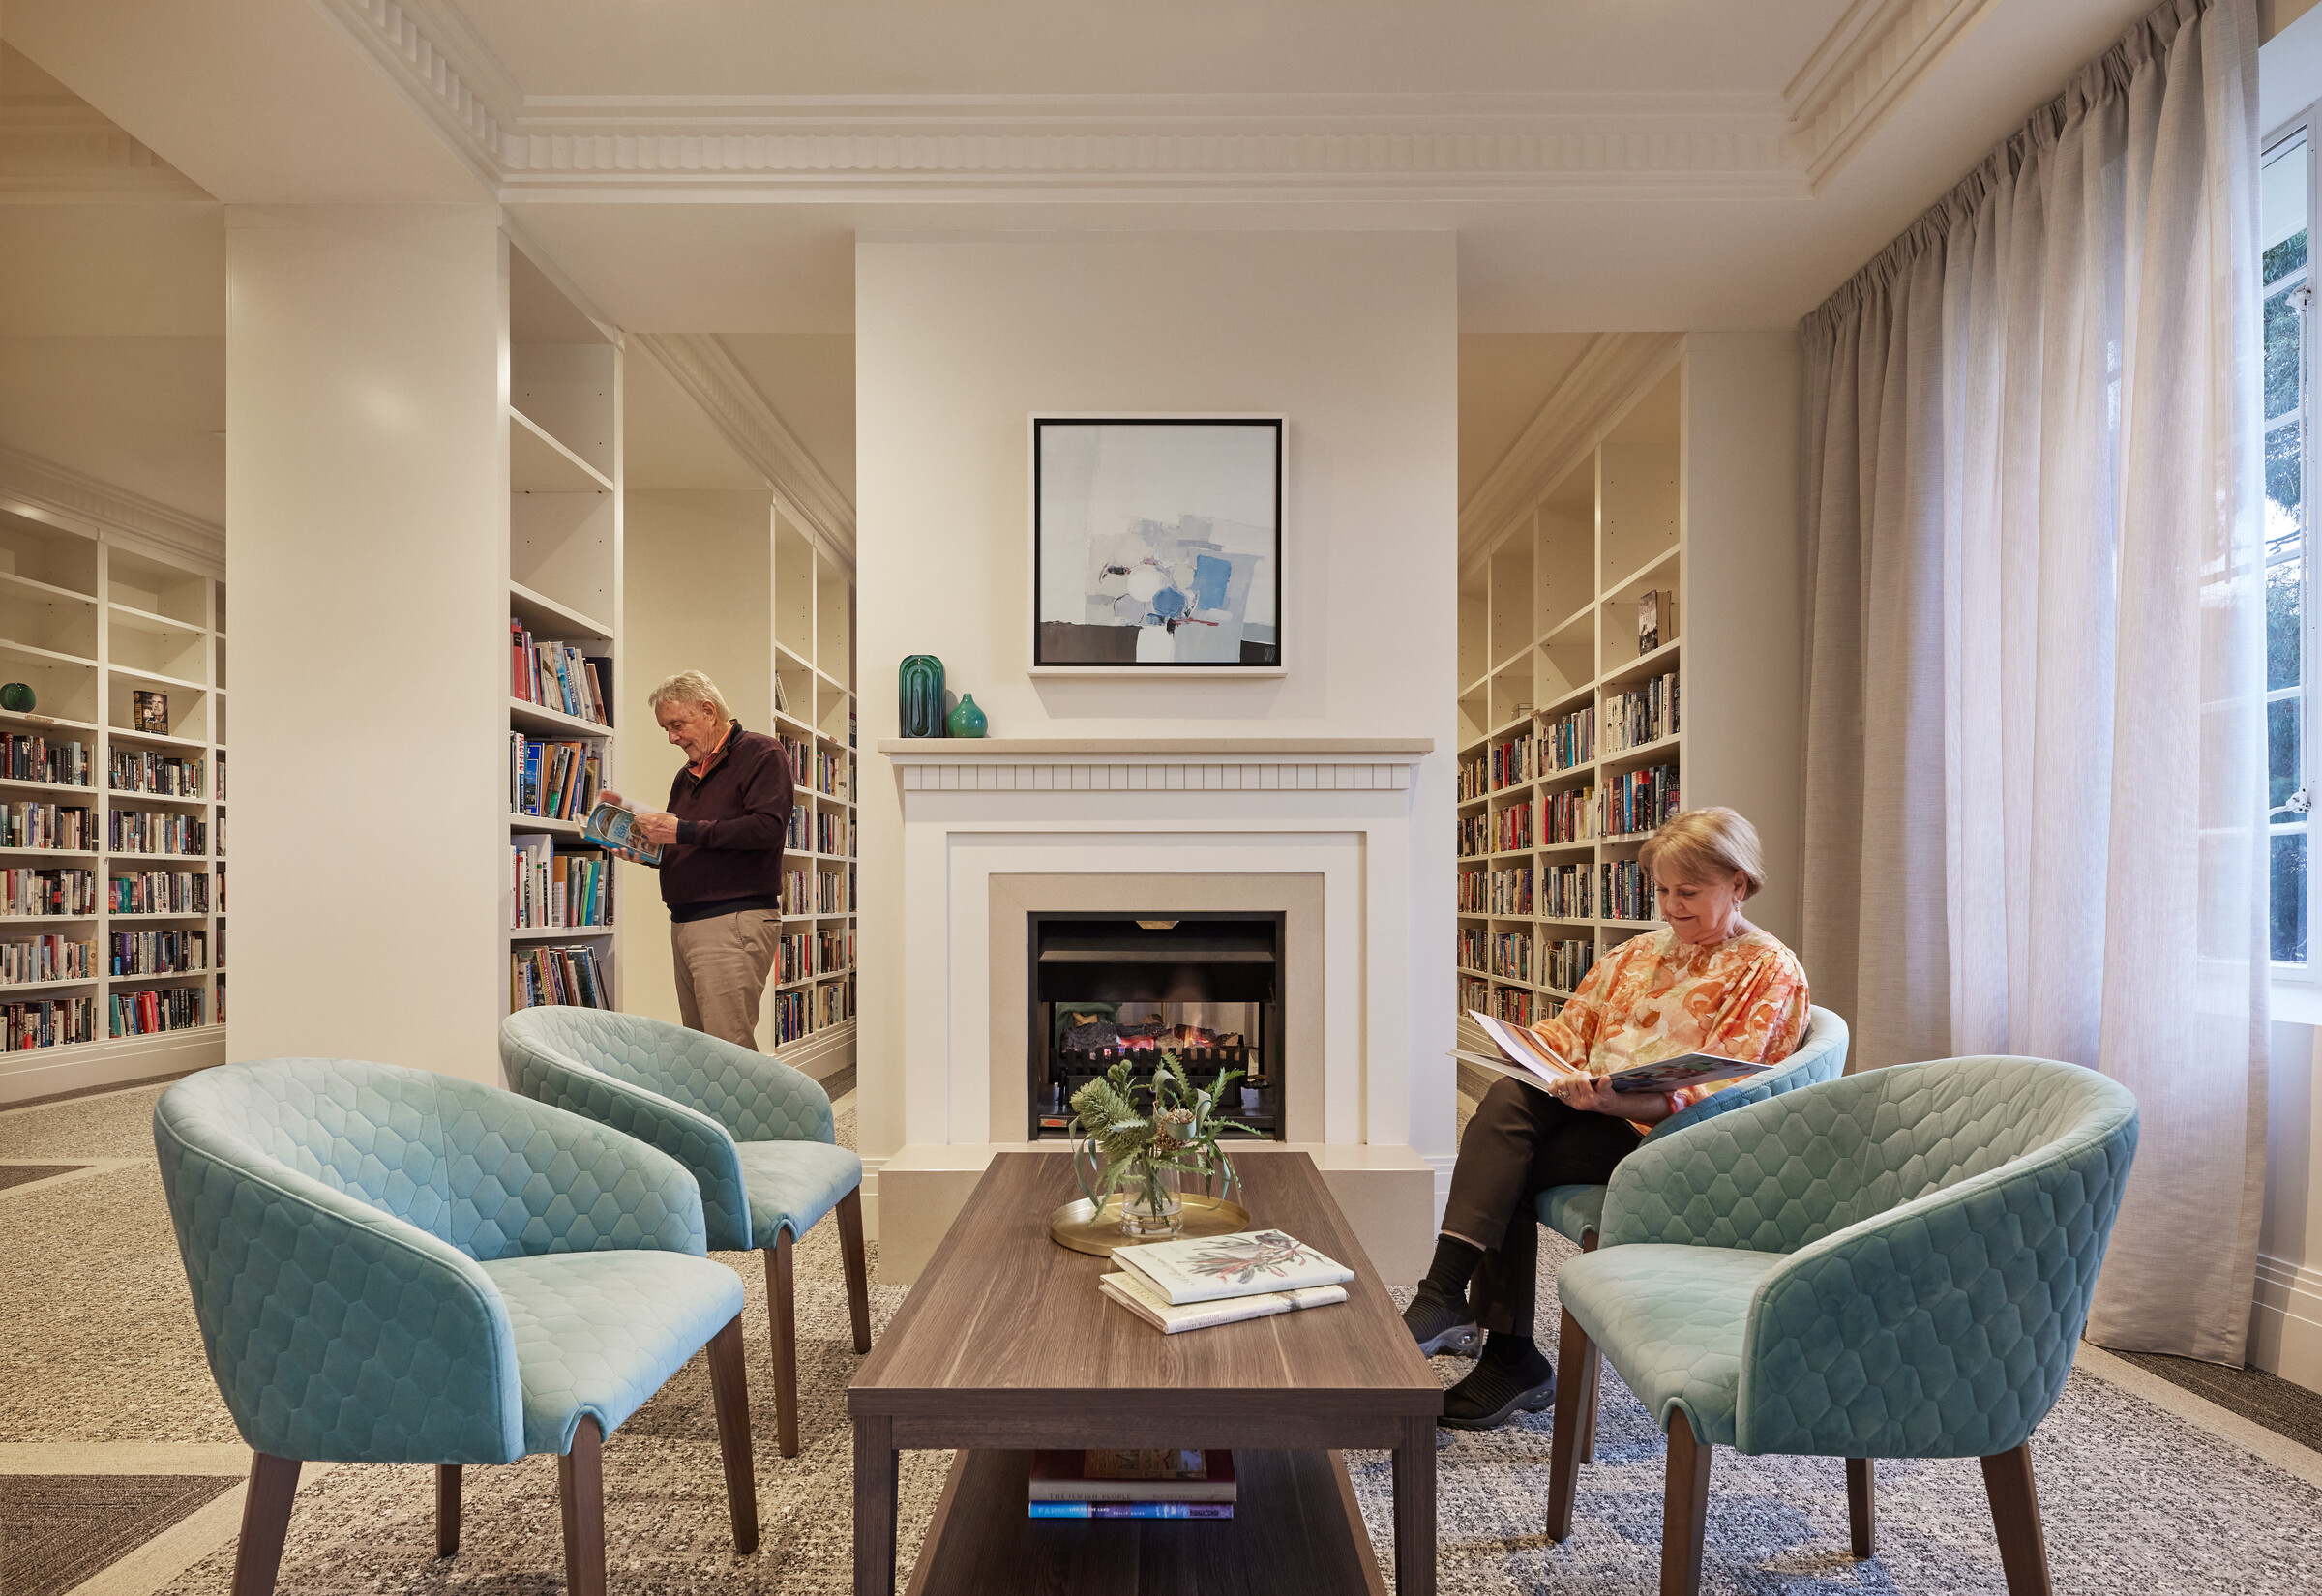 Classic Residences Brighton library room with fireplace, seating and well stocked bookcases